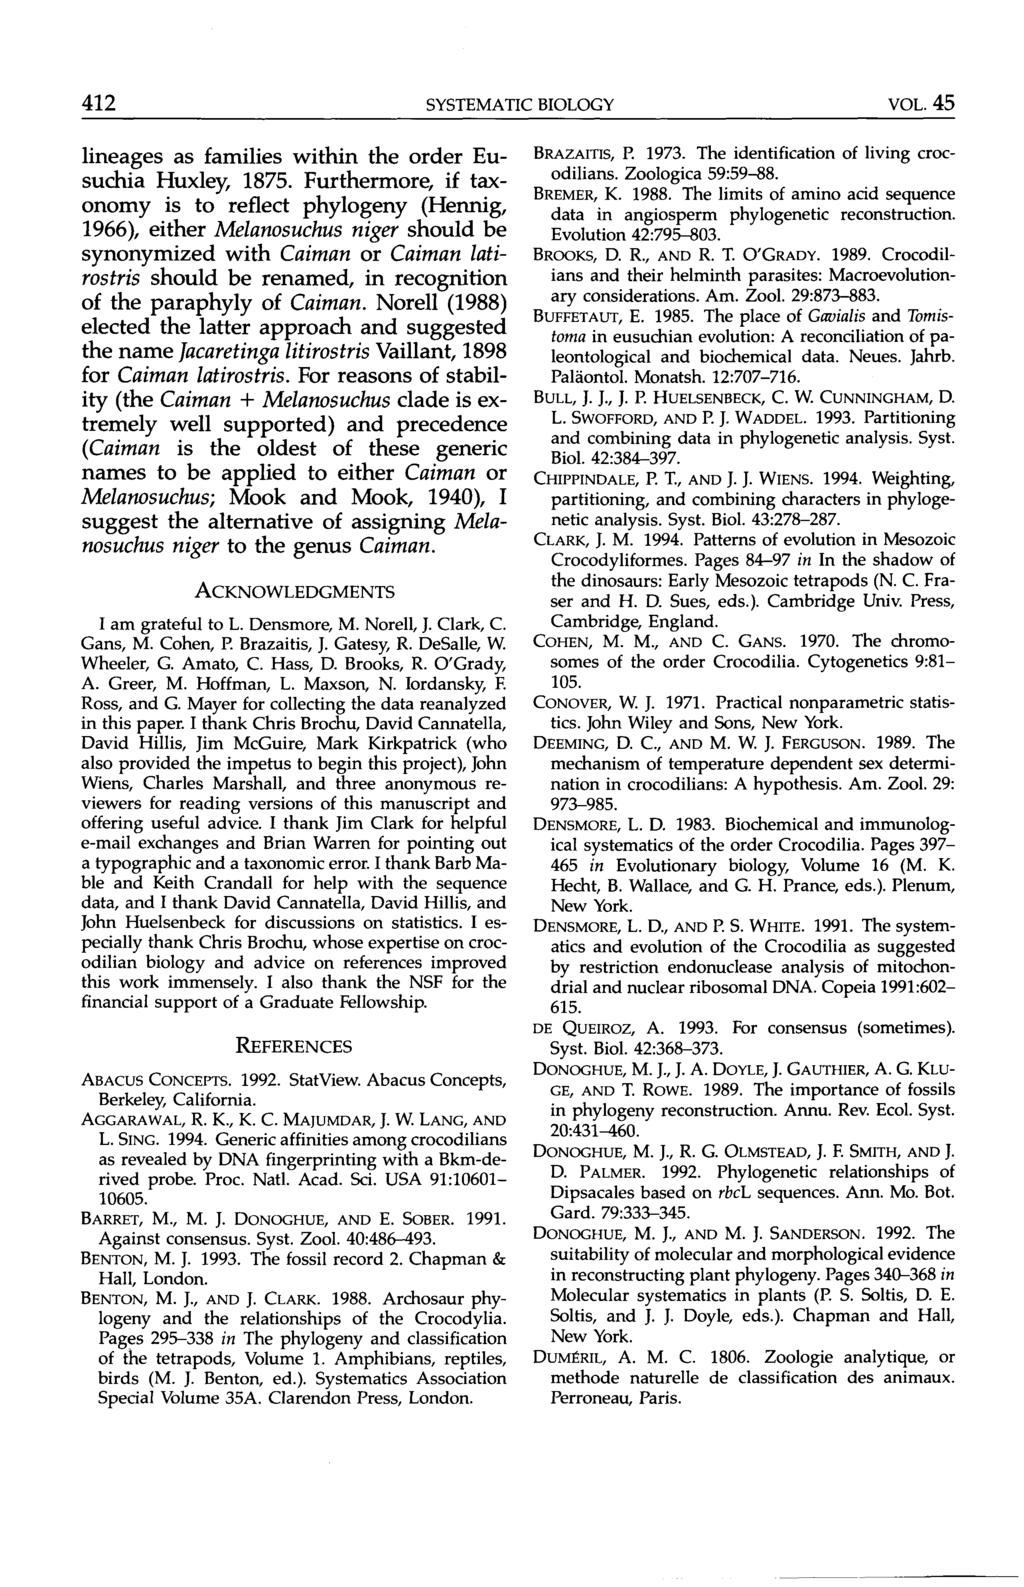 412 SYSTEMATIC BIOLOGY VOL. 45 lineages as families within the order Eusuchia Huxley, 1875.